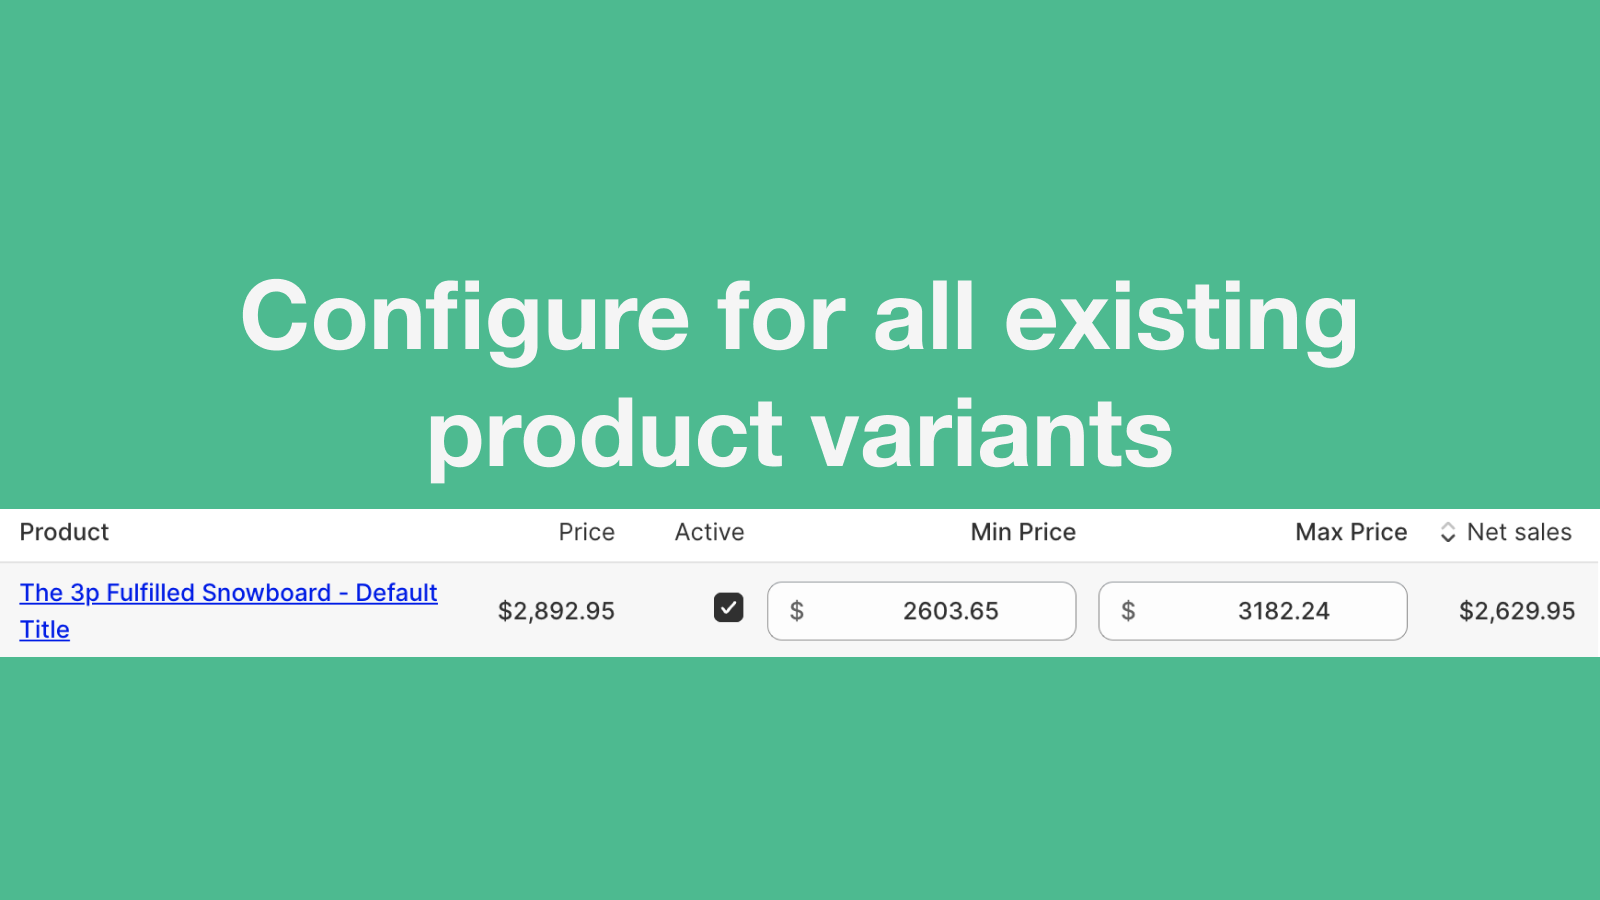 Configure for all existing product variants